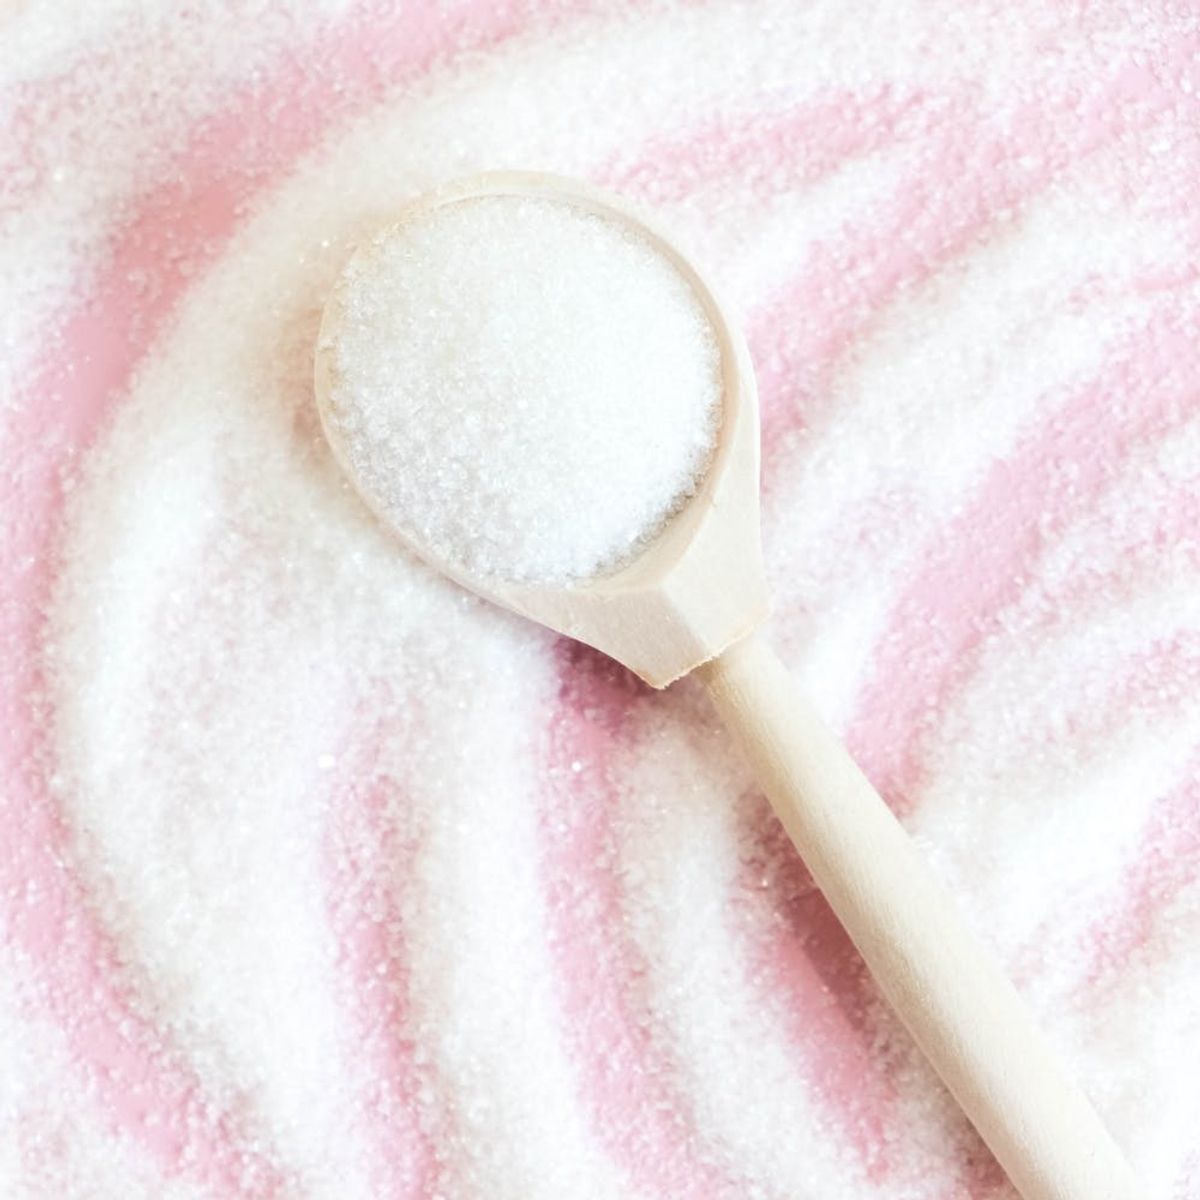 5 Simple Tips to Cut Back on Added Sugars in Your Diet